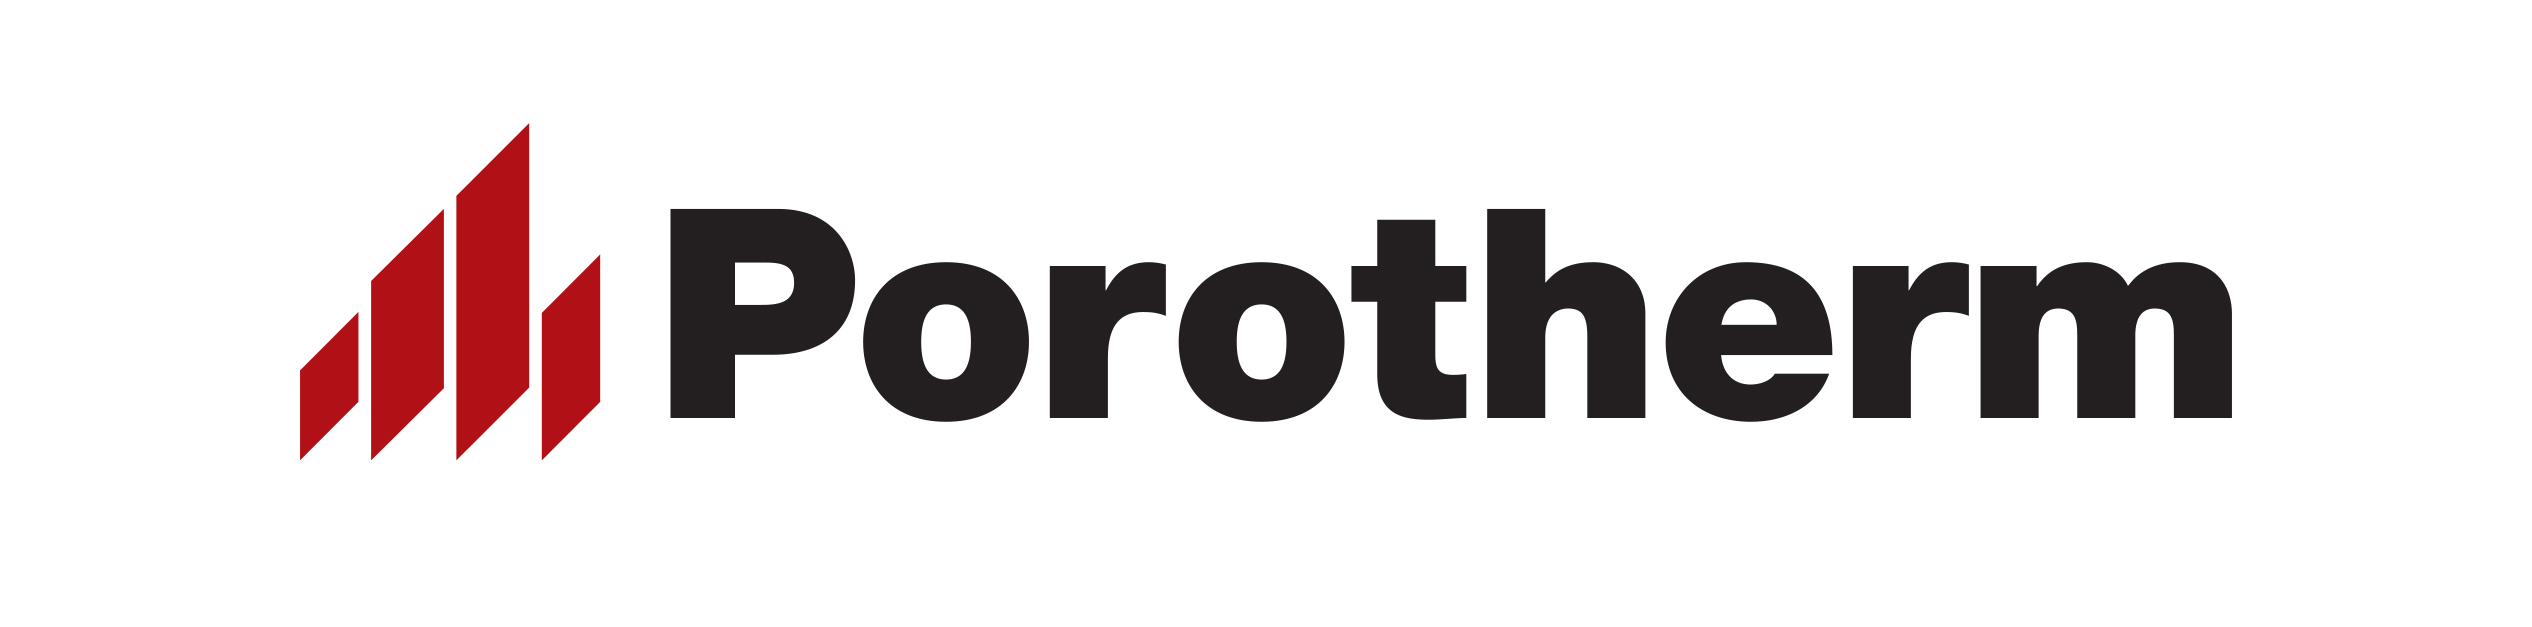 Porotherm logo with whitespace. File compatible with Adobe Illustrator CS4 and later versions.